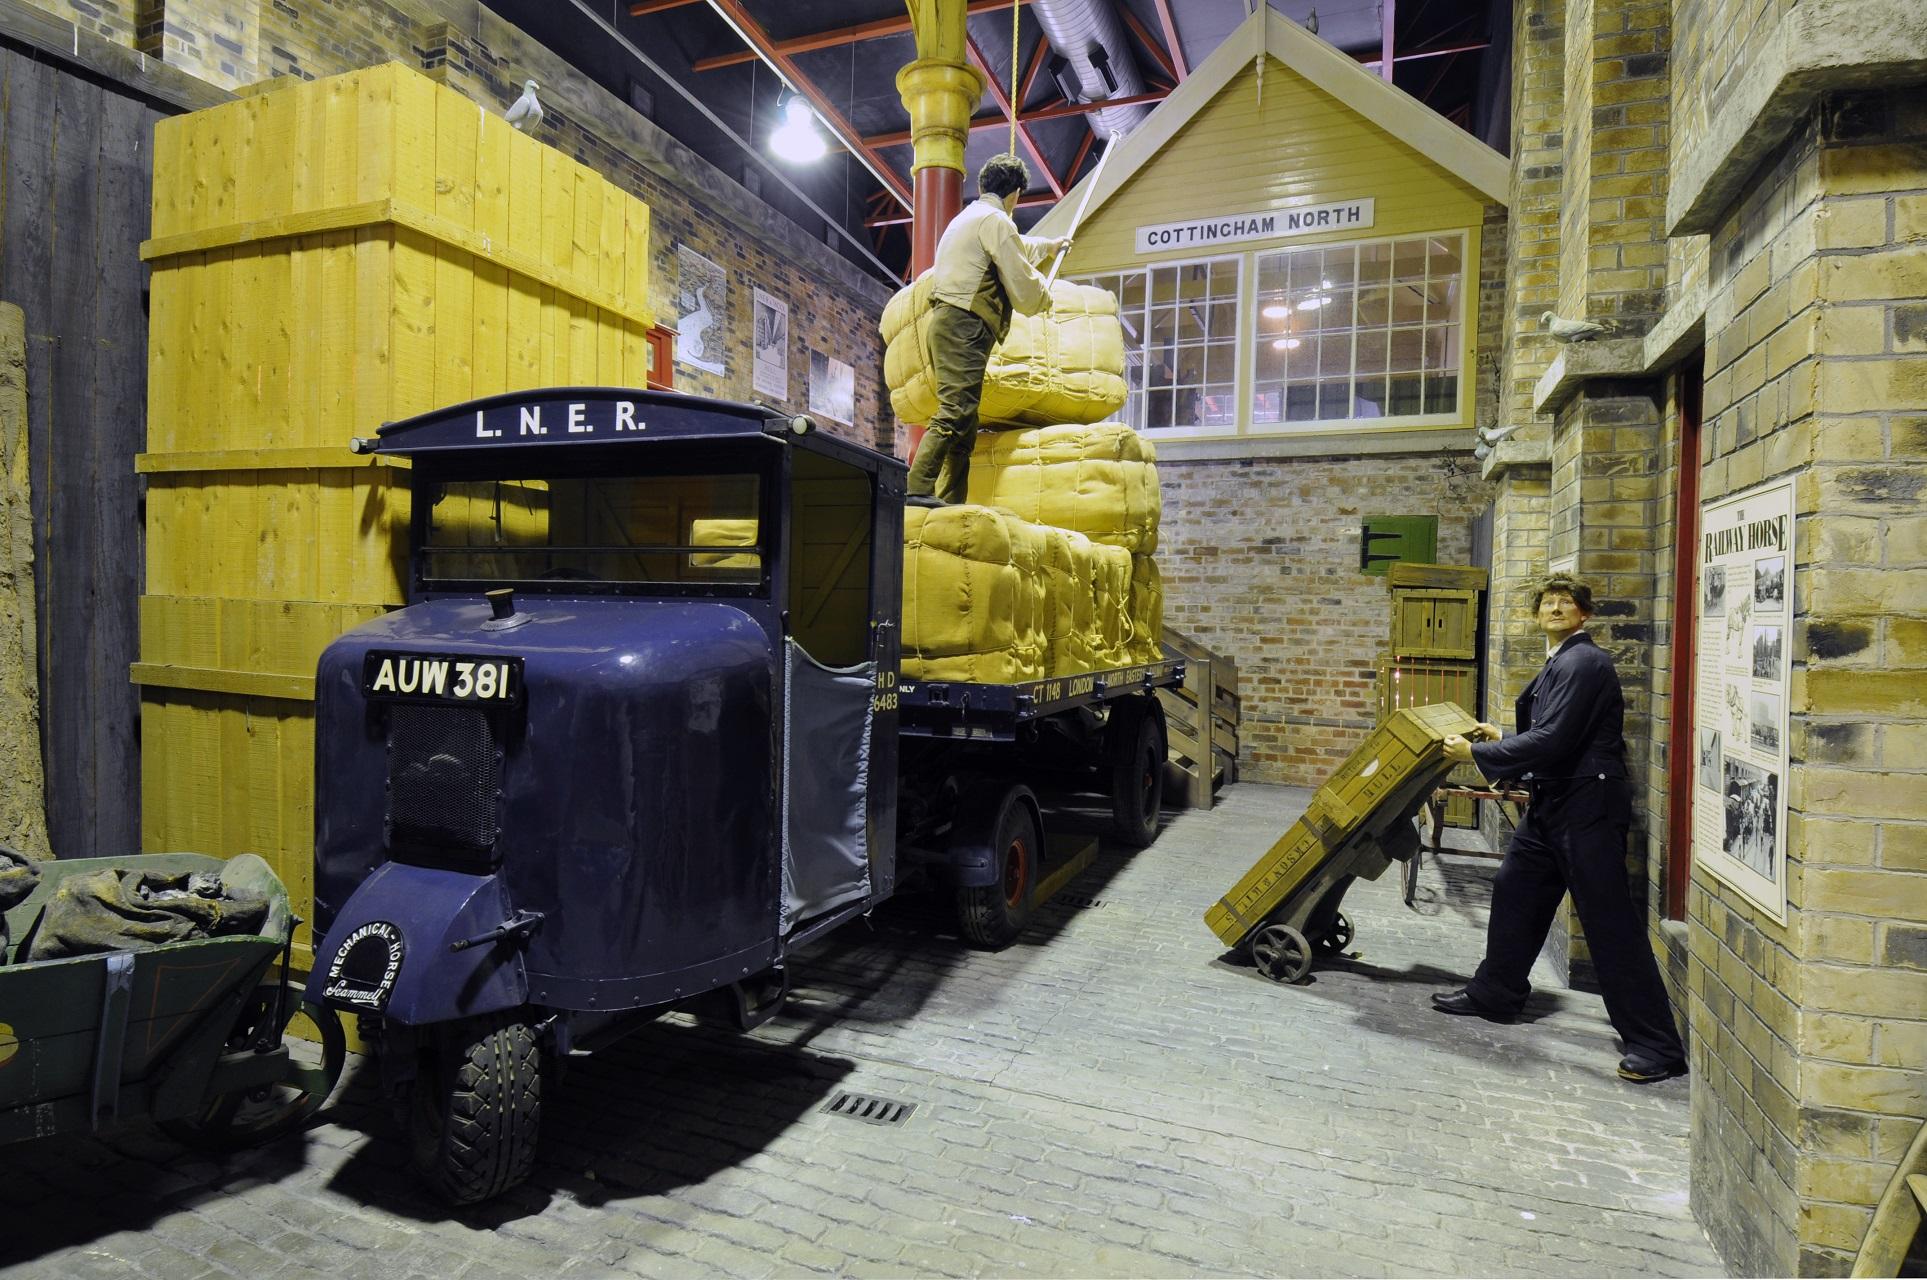 A railway scene in a museum with a three wheel van and a signal box behind it.